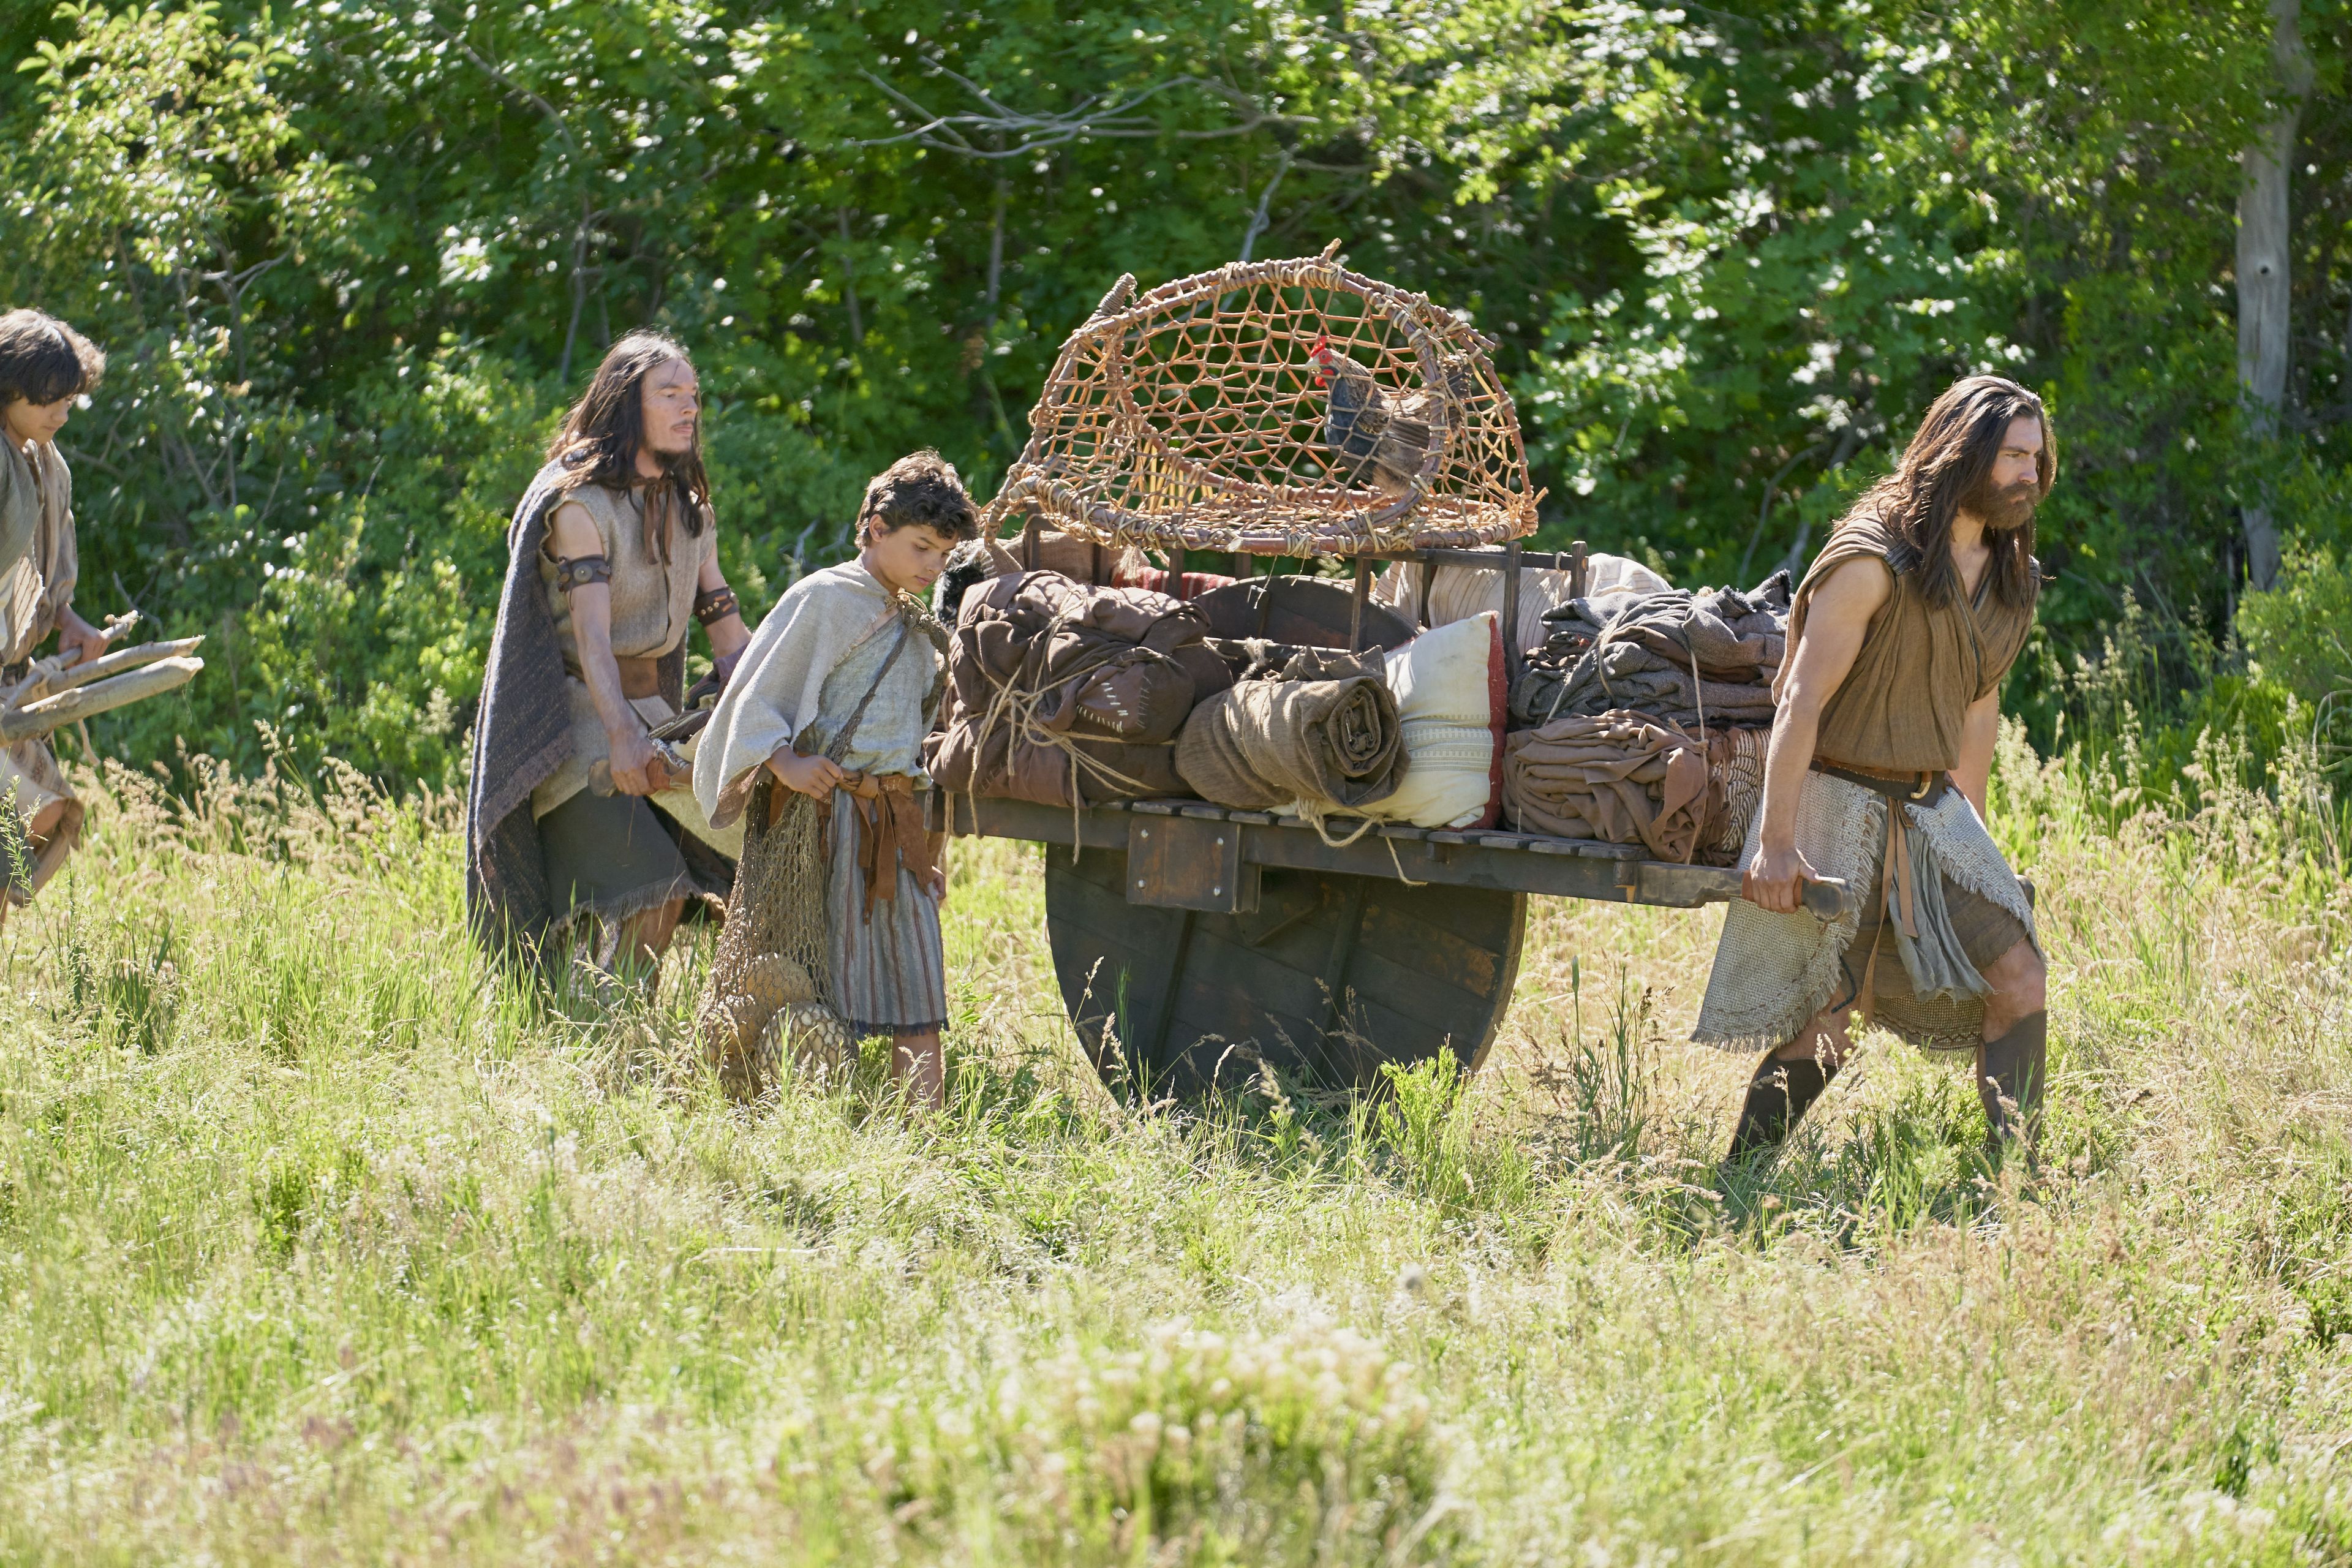 Nephi, Joseph, and Sam moving a cart of their belongings as they flee the Lamanites.